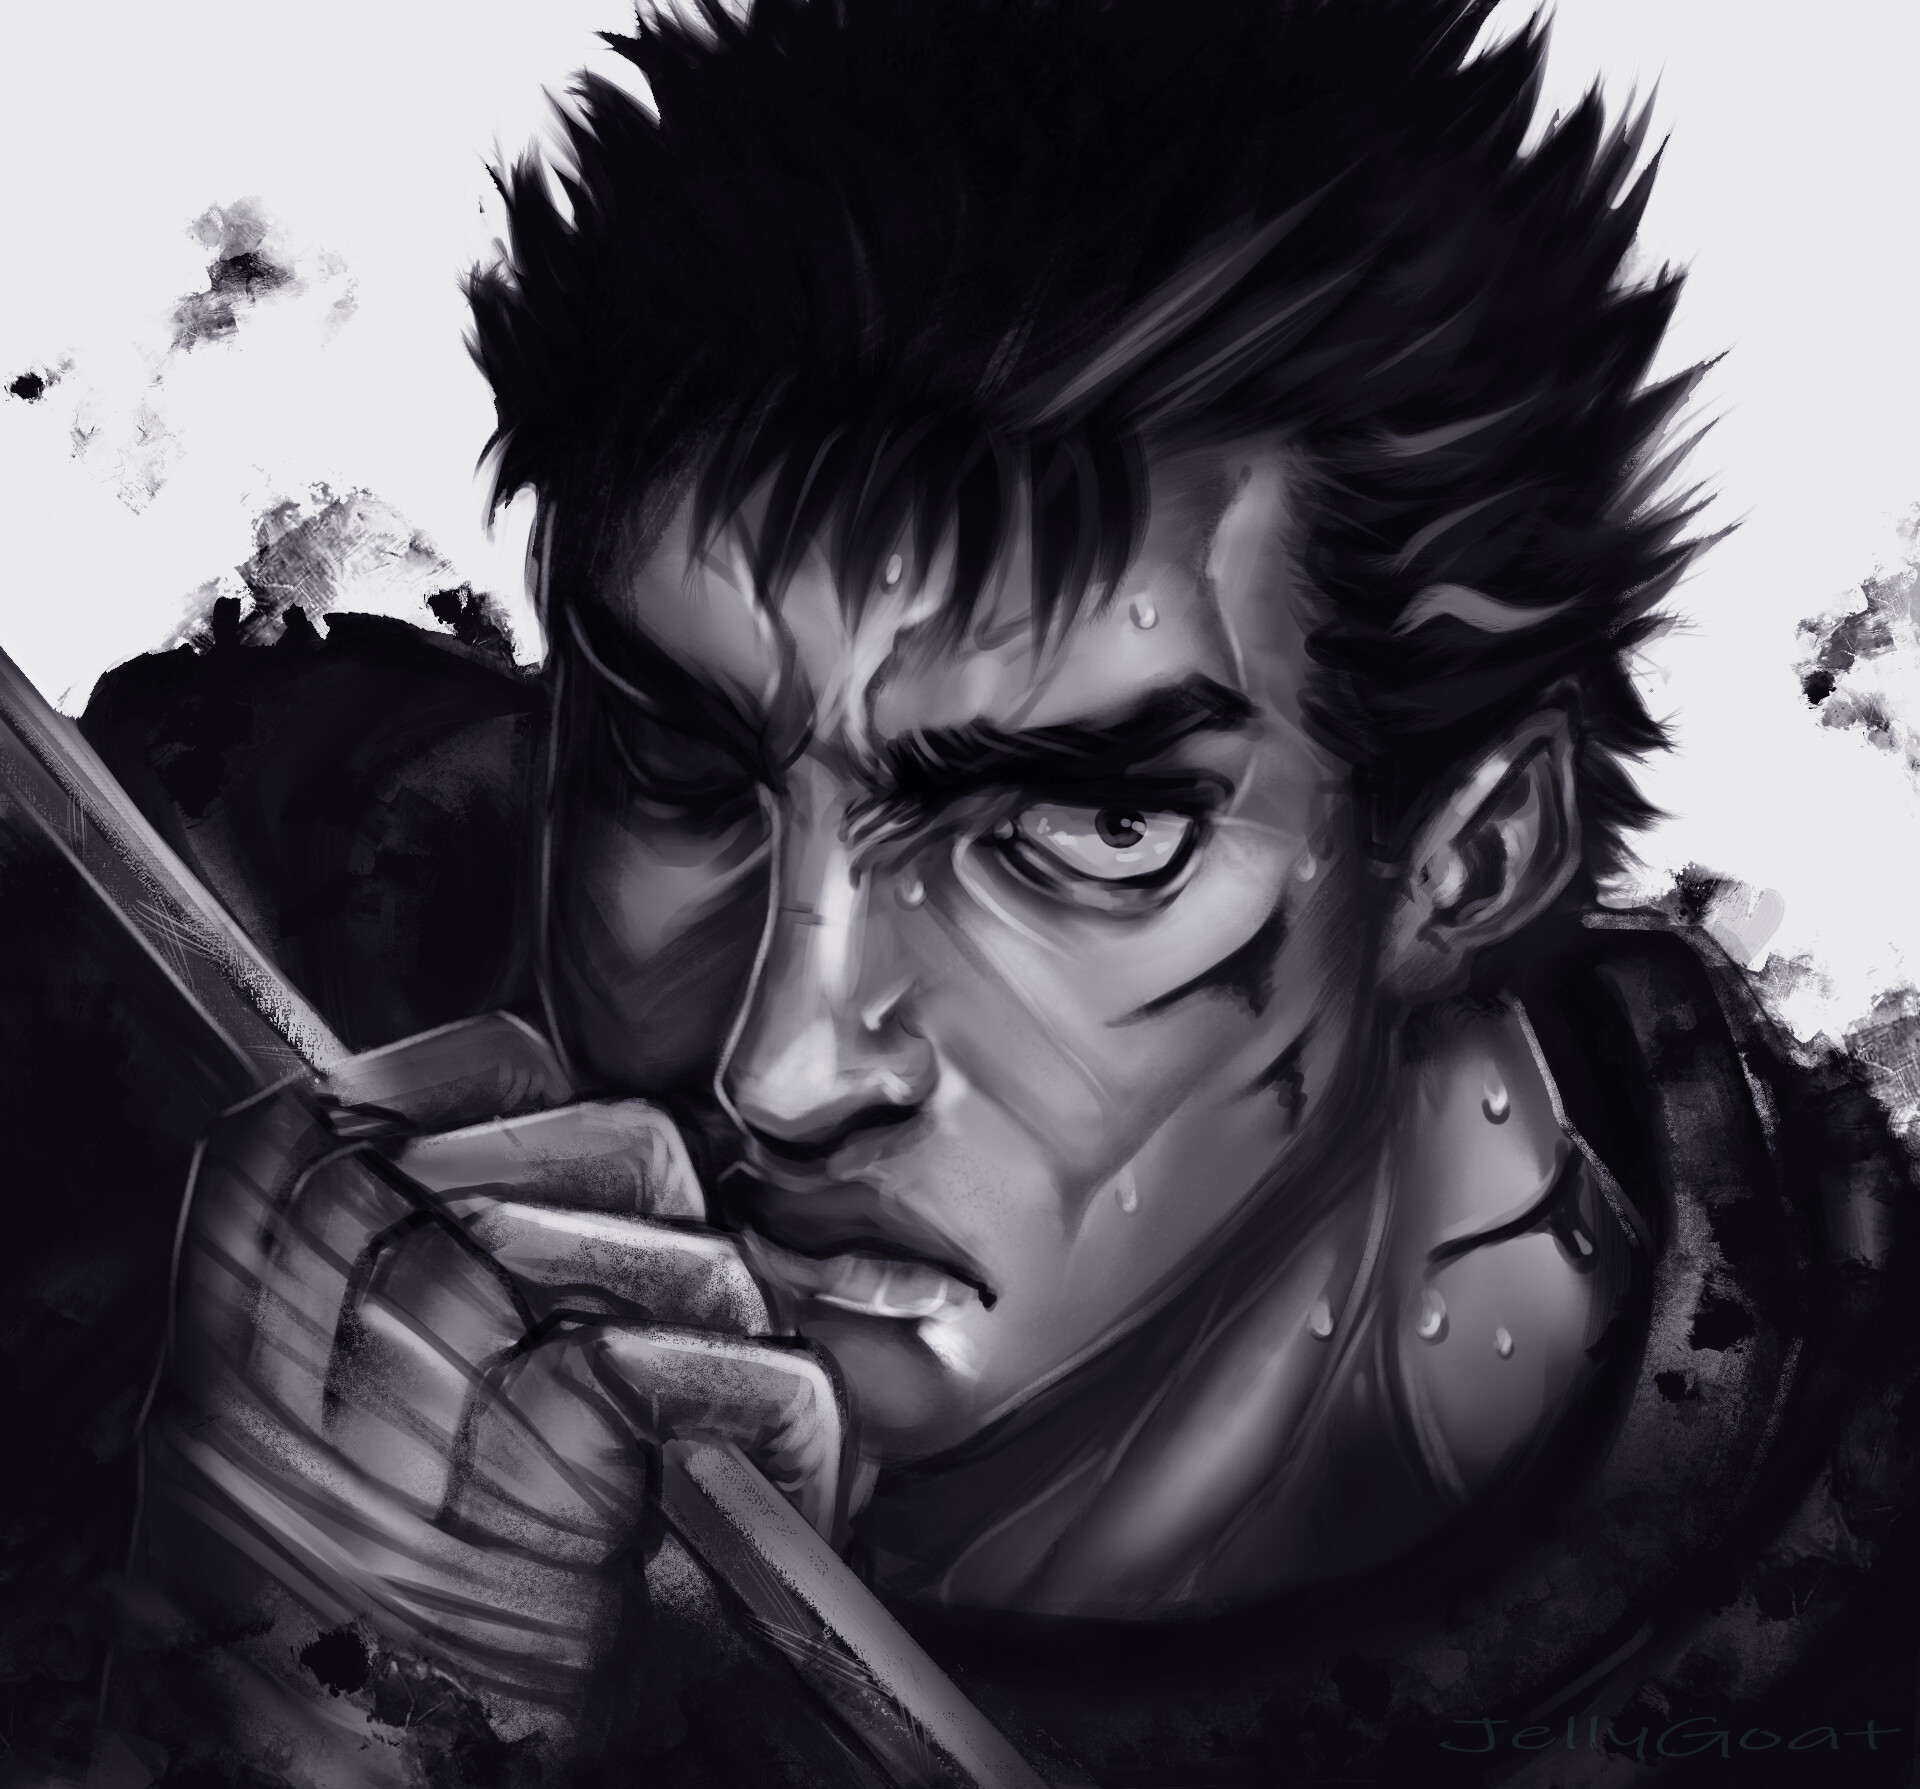 Guts = the GOAT